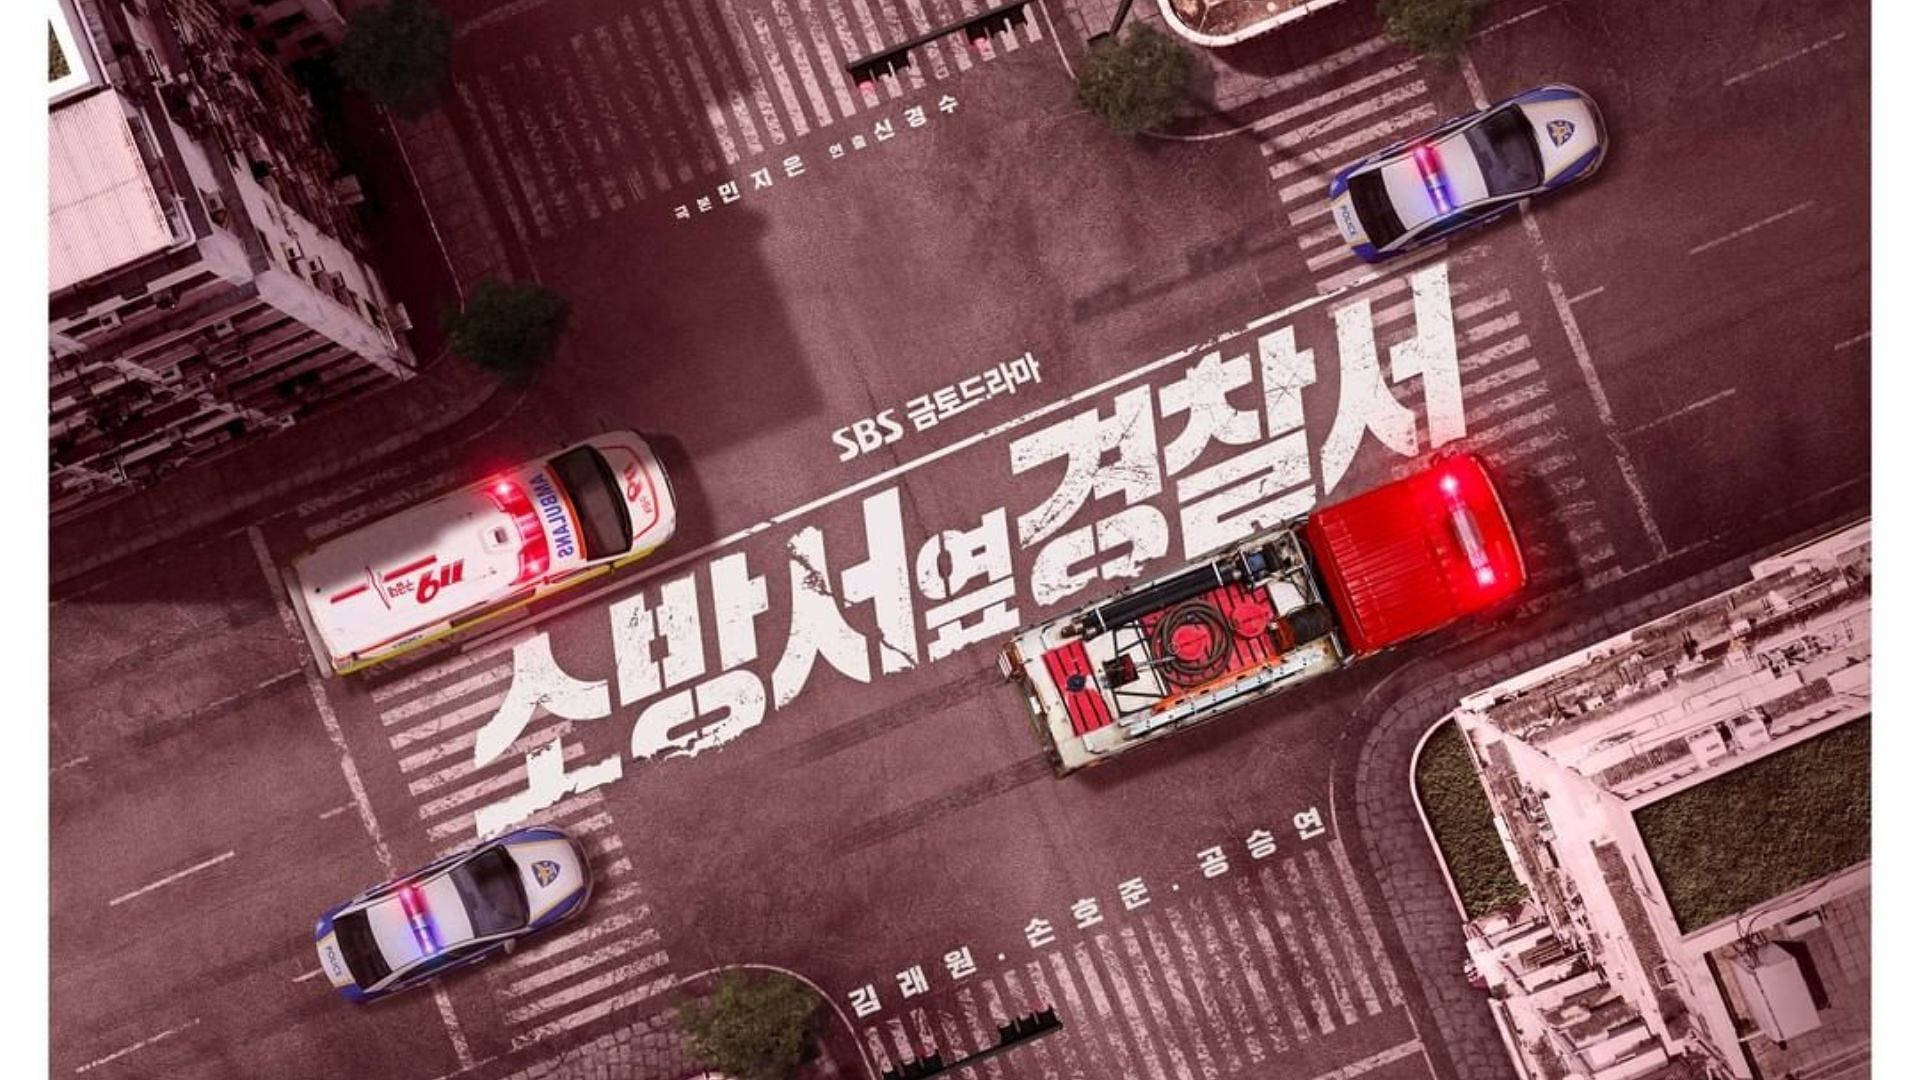 Poster of The First Responders (Image via sbsentertainment/Instagram)